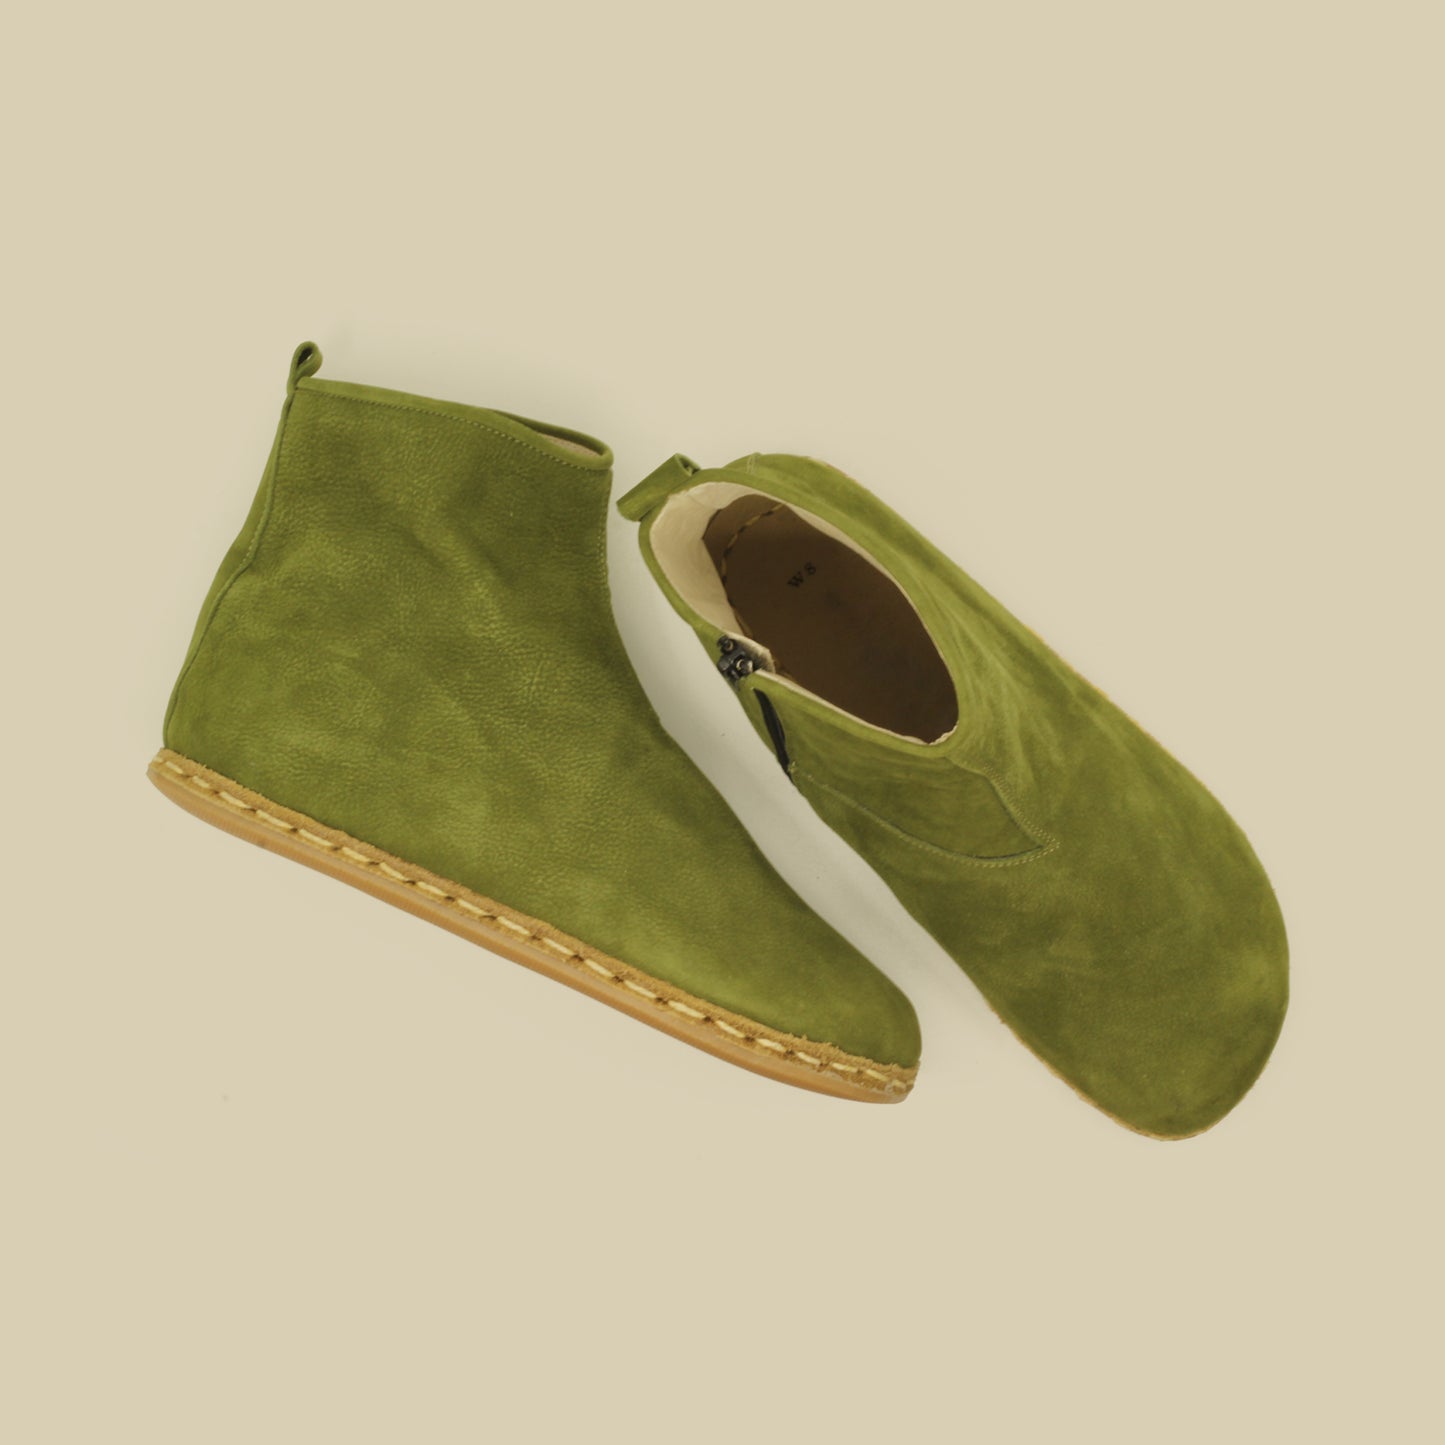 Green Nubuck Ankle Boots with Zipper: A Barefoot Odyssey with Zero Drop and Rubber Sole